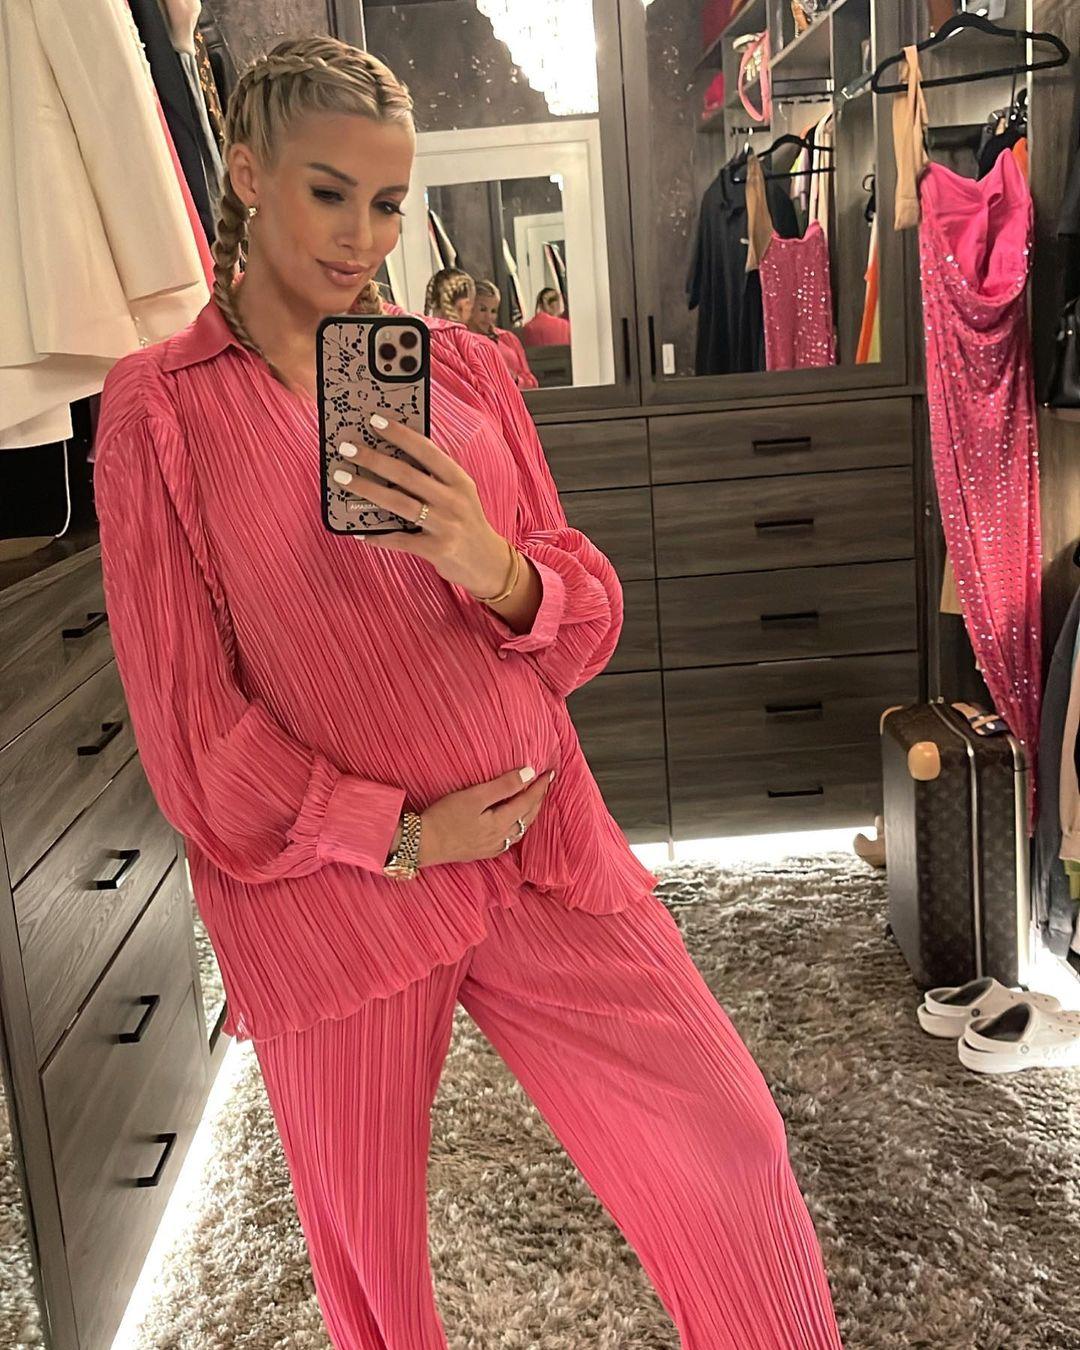 Heather Rae Young Is Enjoying THESE Maternity Looks Until Her Little Angel Arrives